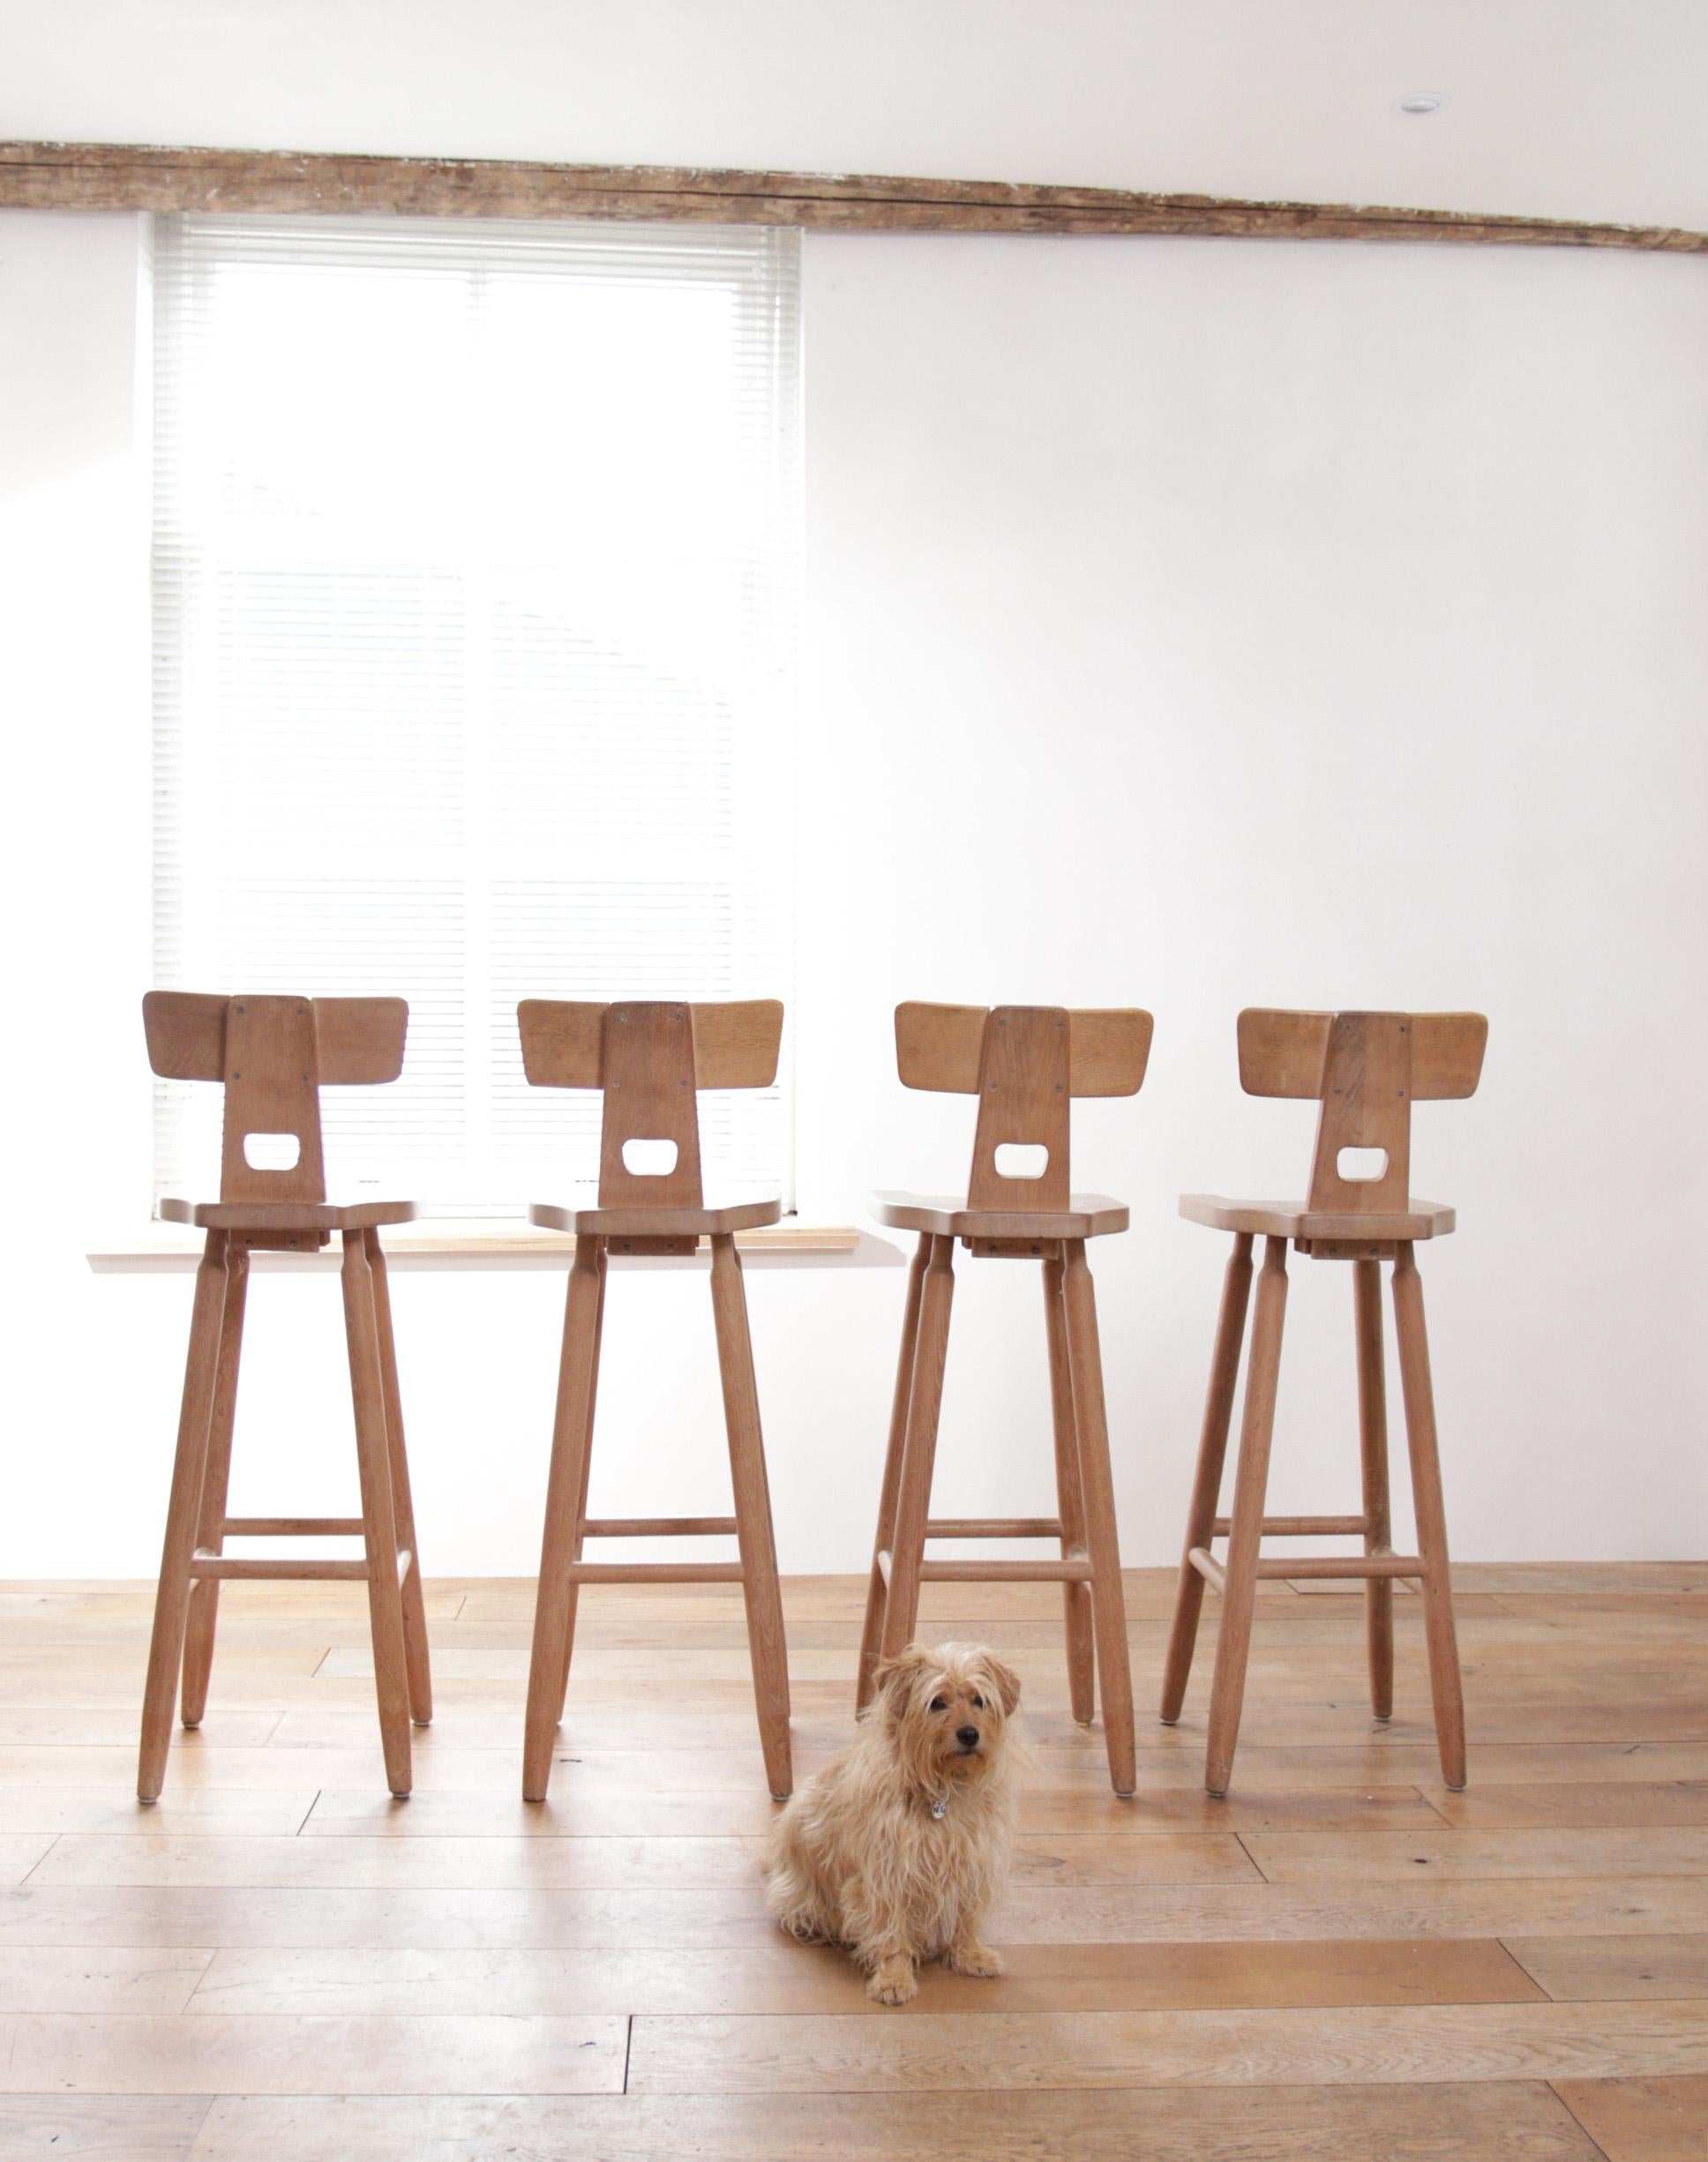 Crafted from solid oak in the 1970s, these four barstools are a testament to the enduring quality of vintage furniture.

Featuring a distinctive hammerhead back design, these barstools exude a sense of sophistication and charm. The gently curved top